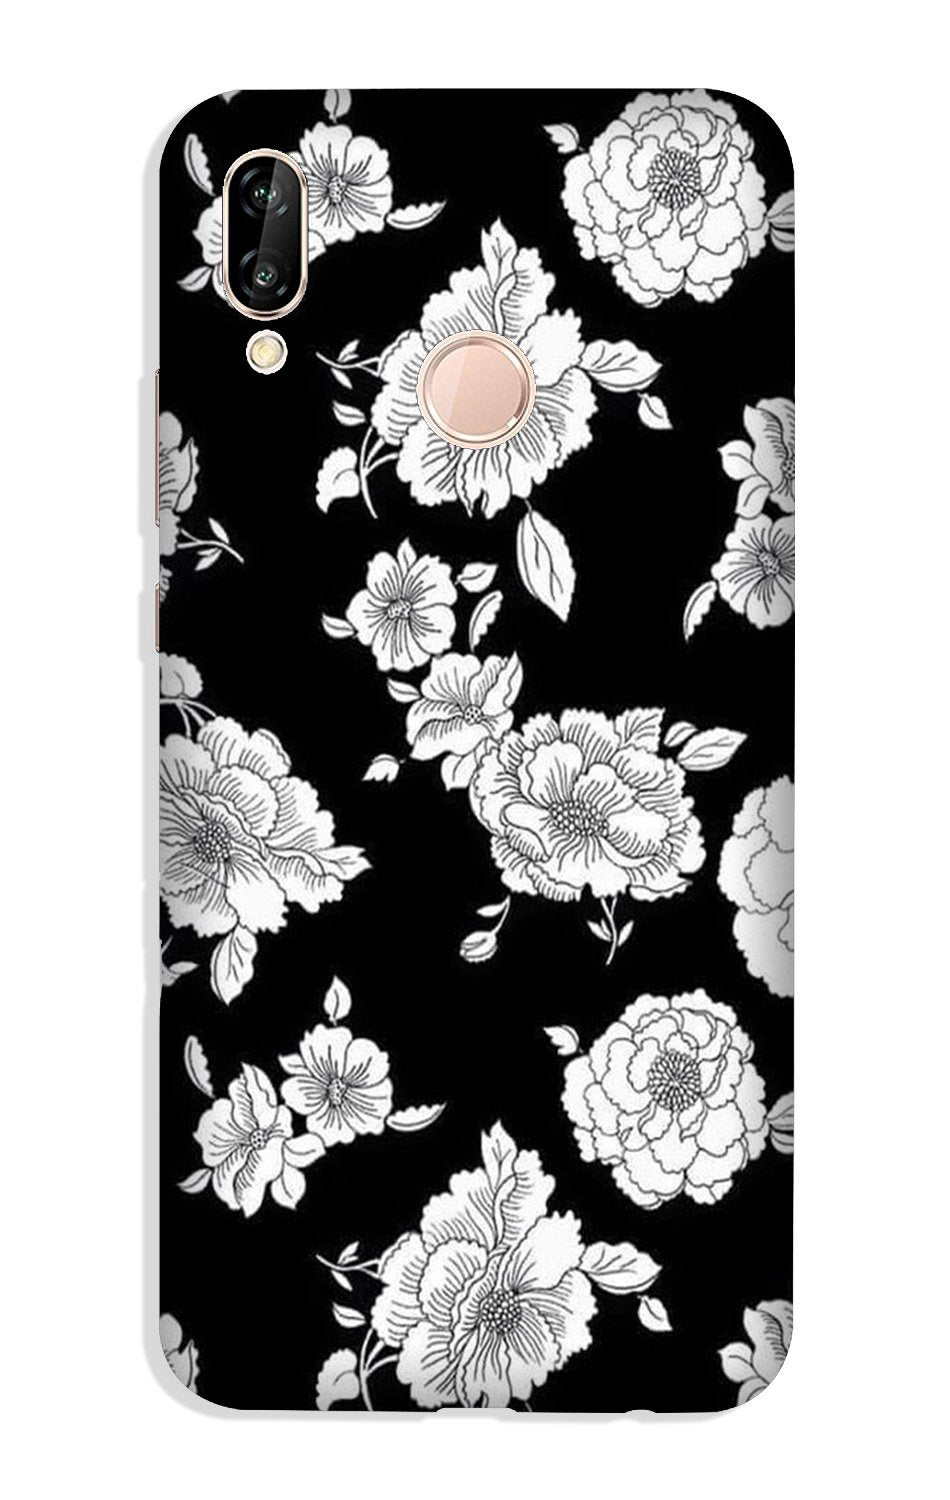 White flowers Black Background Case for Vivo Y95/ Y93